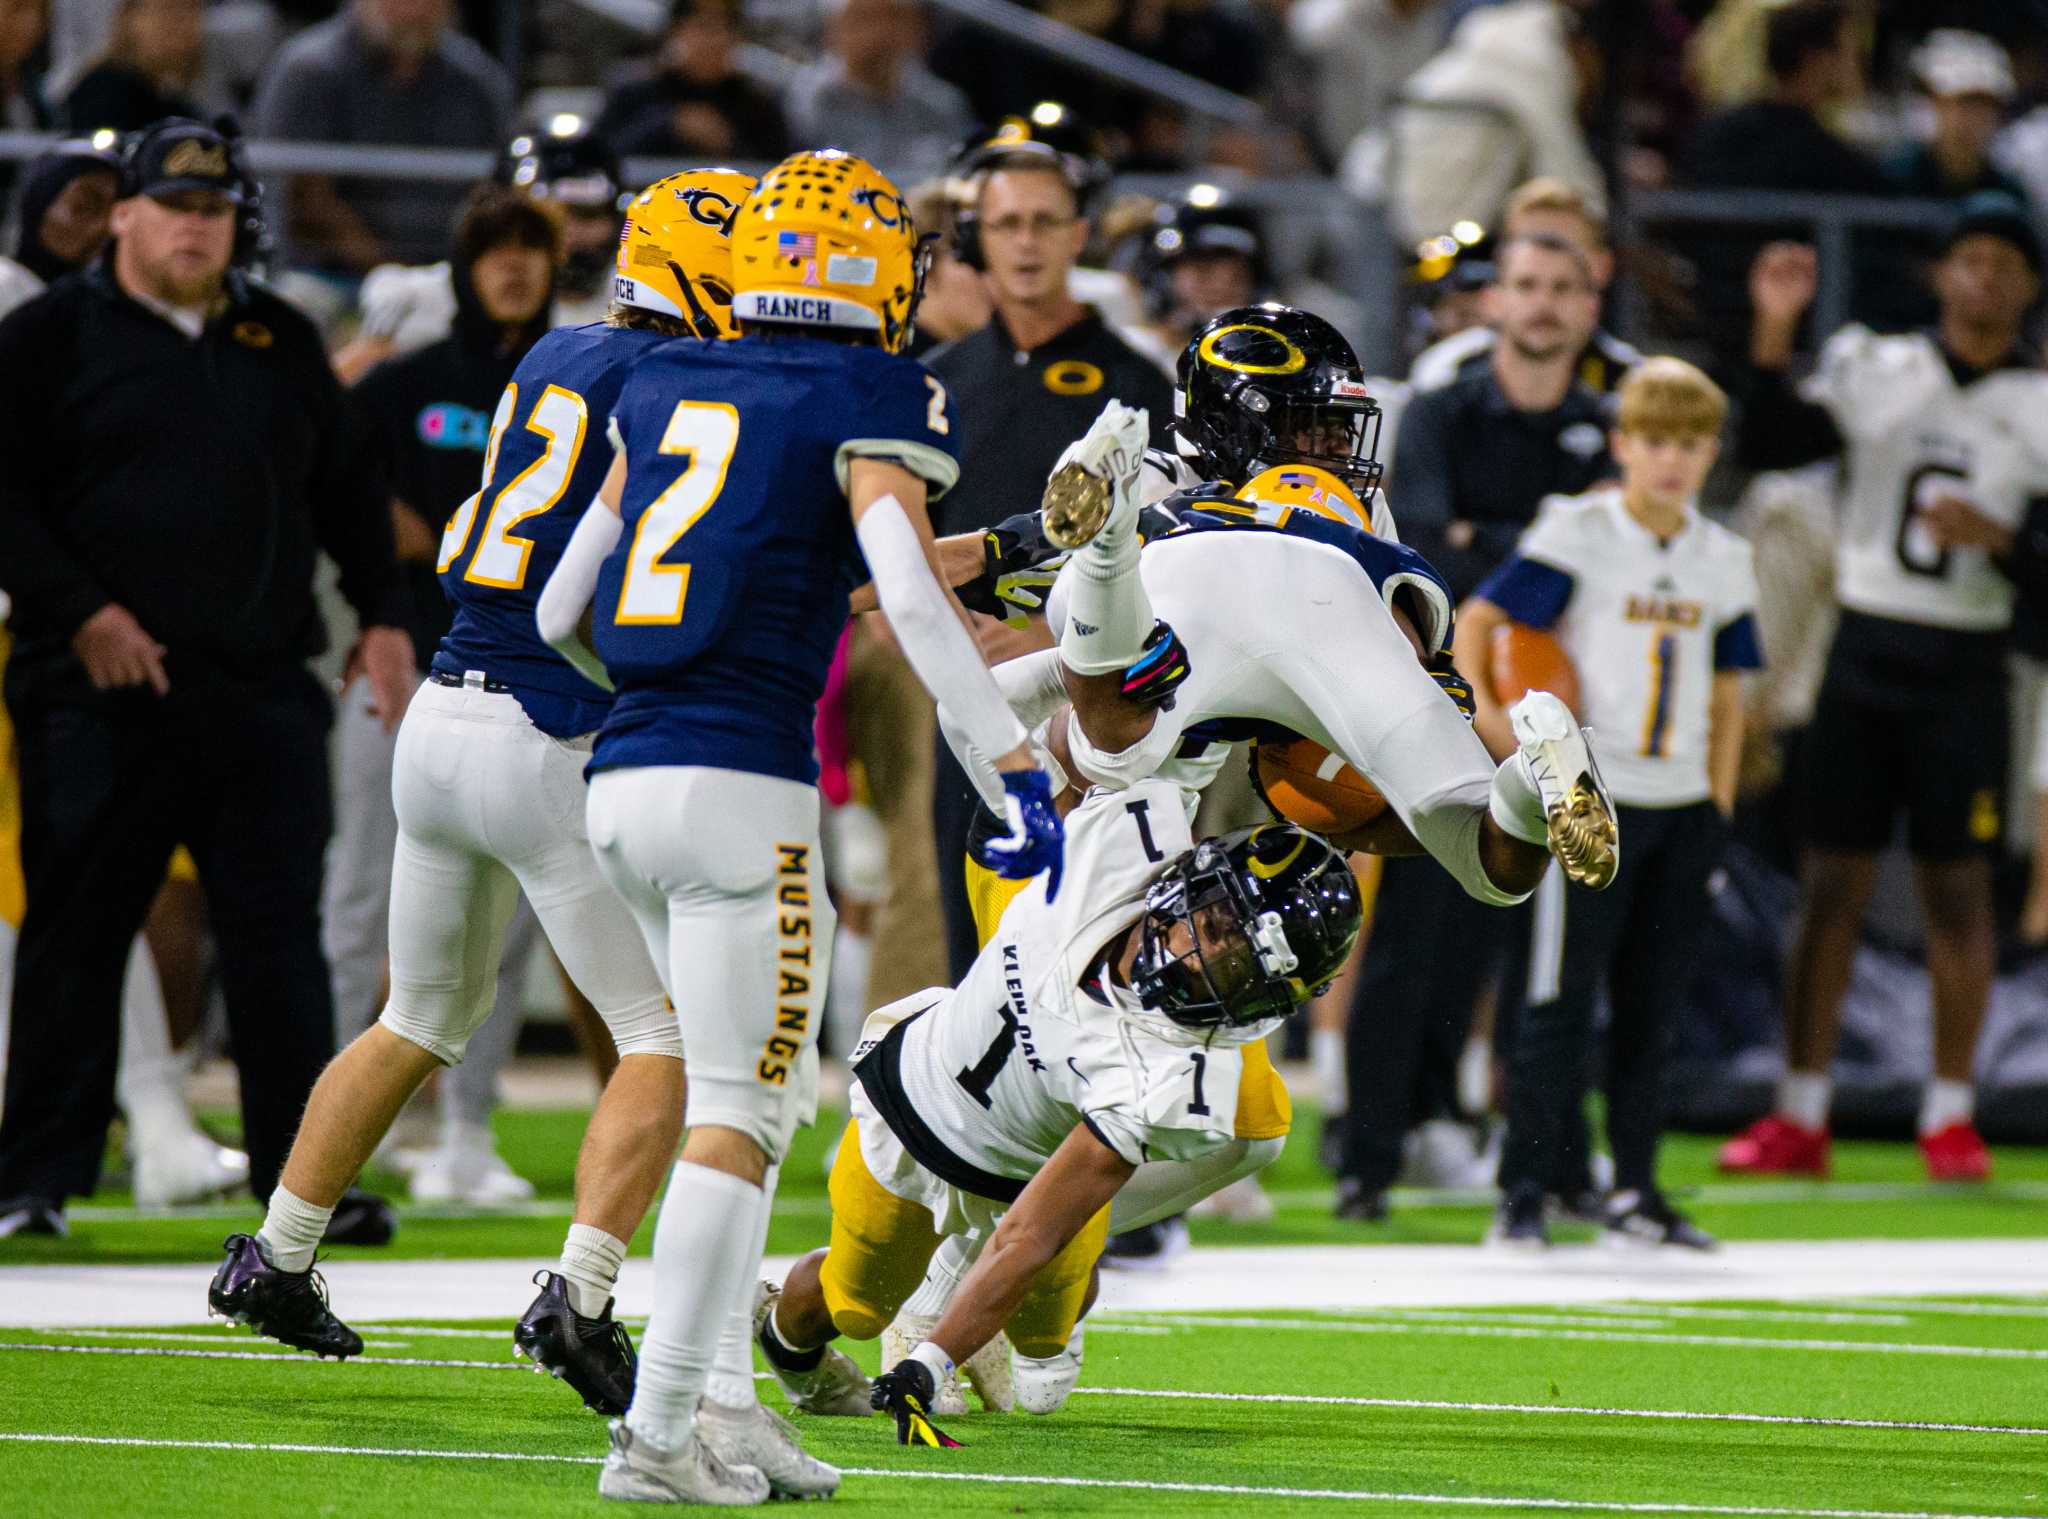 Klein Oak moves past Cy Ranch into area round